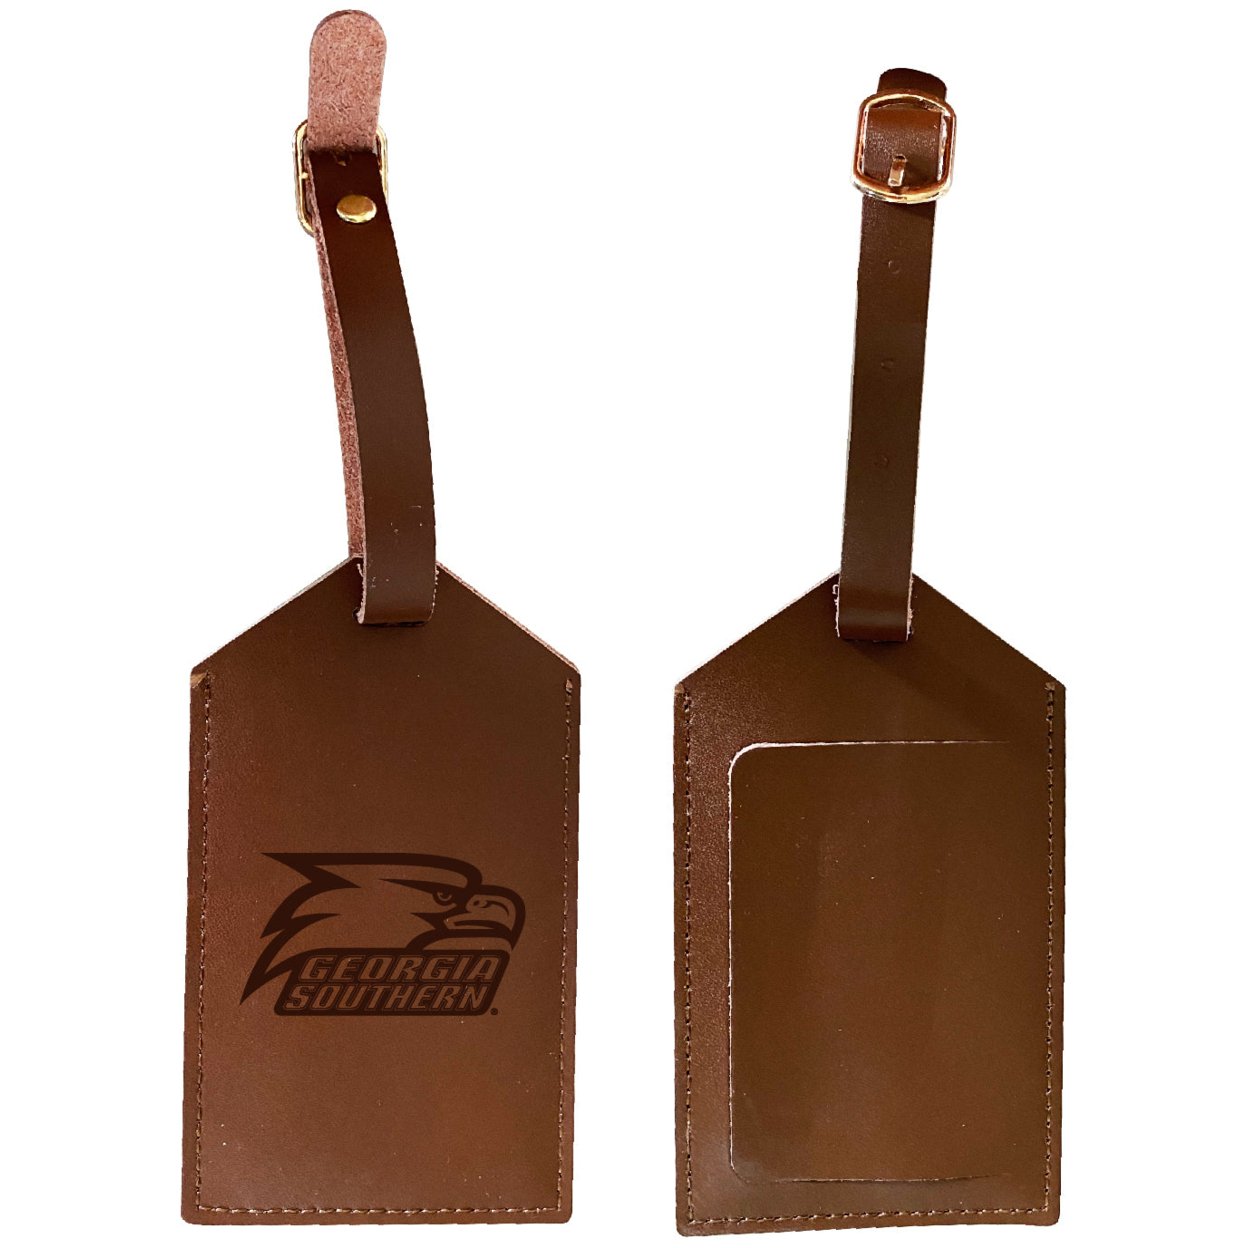 Georgia Southern Eagles Leather Luggage Tag Engraved